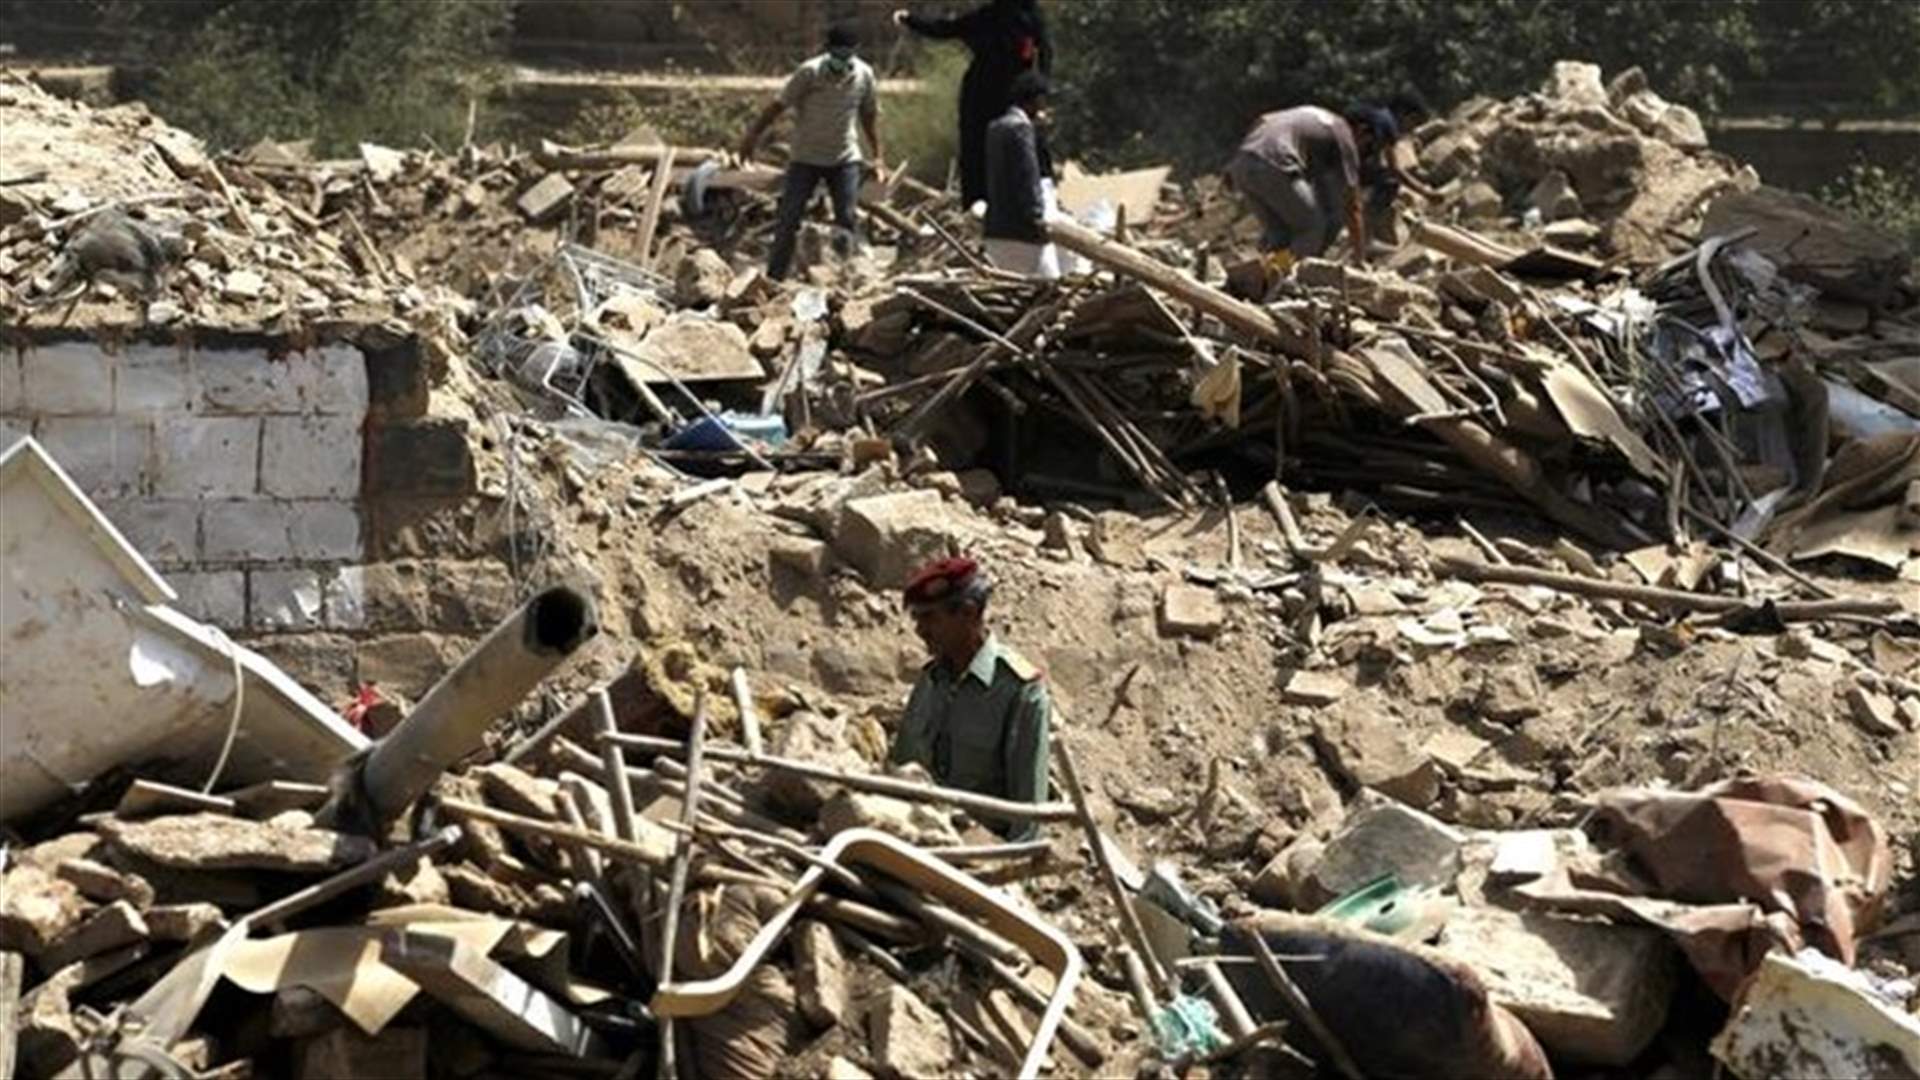 Saudis say sending aid to all of Yemen including Houthi areas